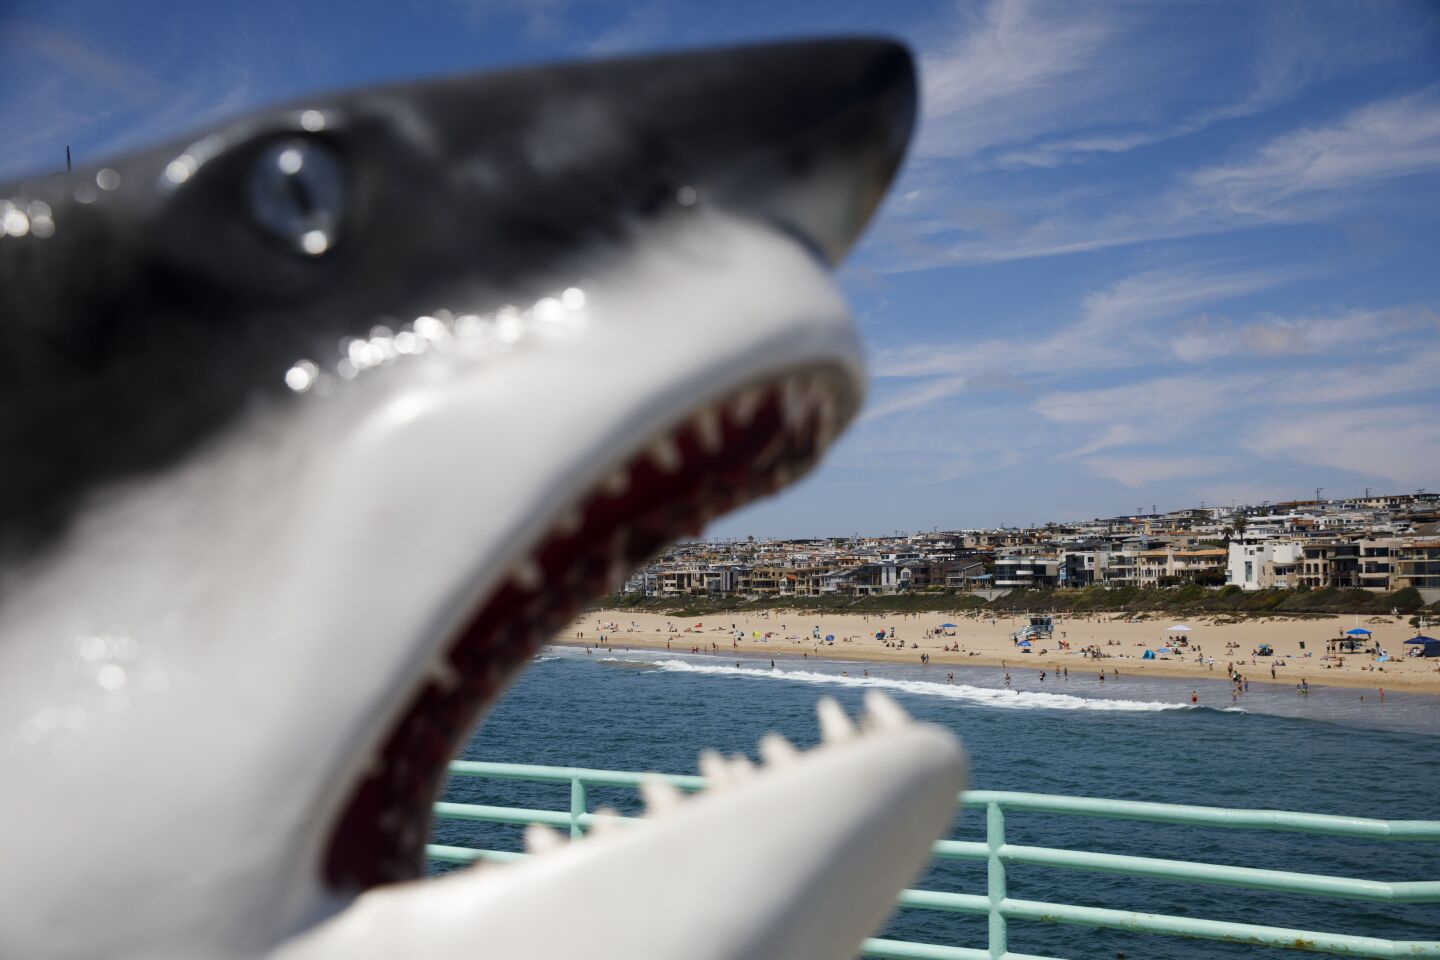 A model of a Great White Shark (Carcharodon carcharias) frames homes on The Strand from the Roundhouse Aquarium on the Manhattan Beach Pier on Sunday, August 18, 2019 in Manhattan Beach, CA. (Patrick T. Fallon/ For The Los Angeles Times)